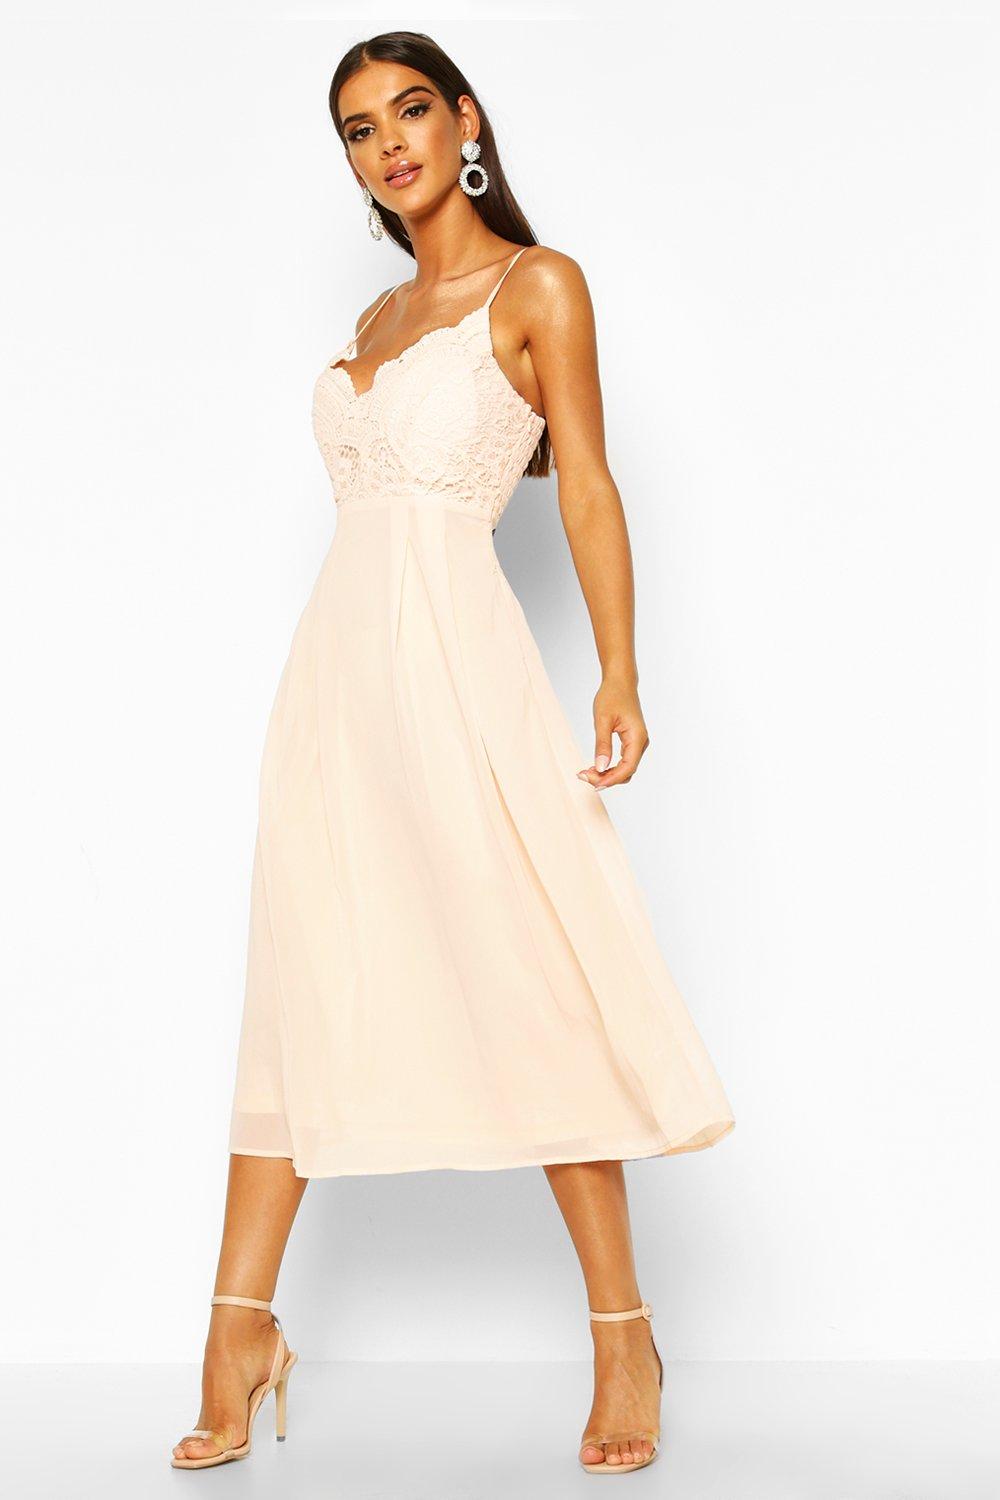 revolve evening gowns